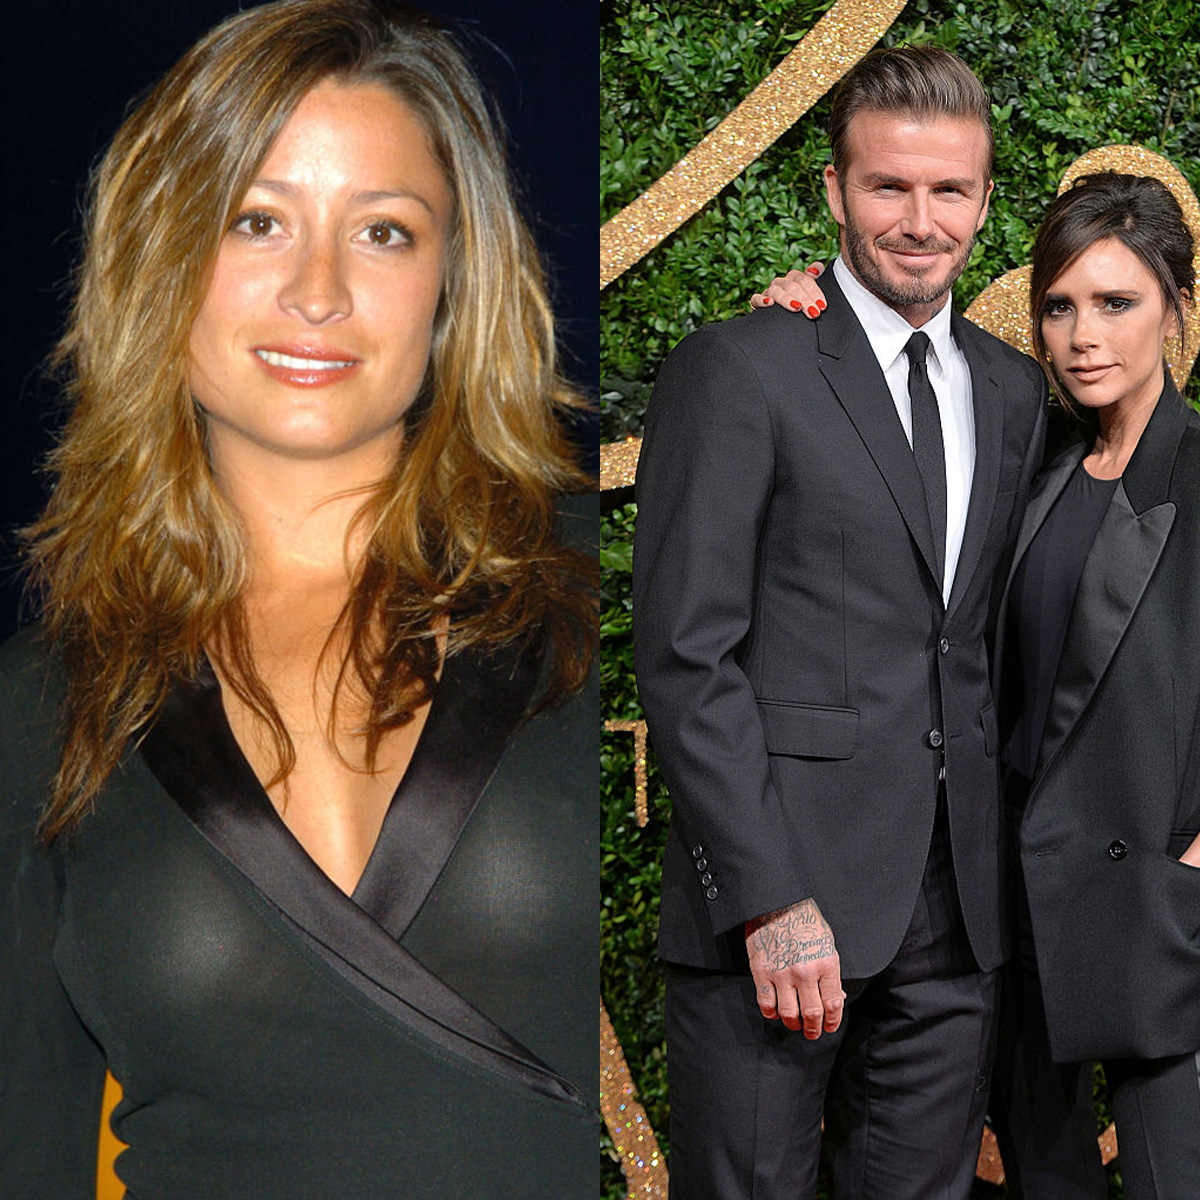 Rebecca Loos Found David Beckham With Other Women Amid Alleged